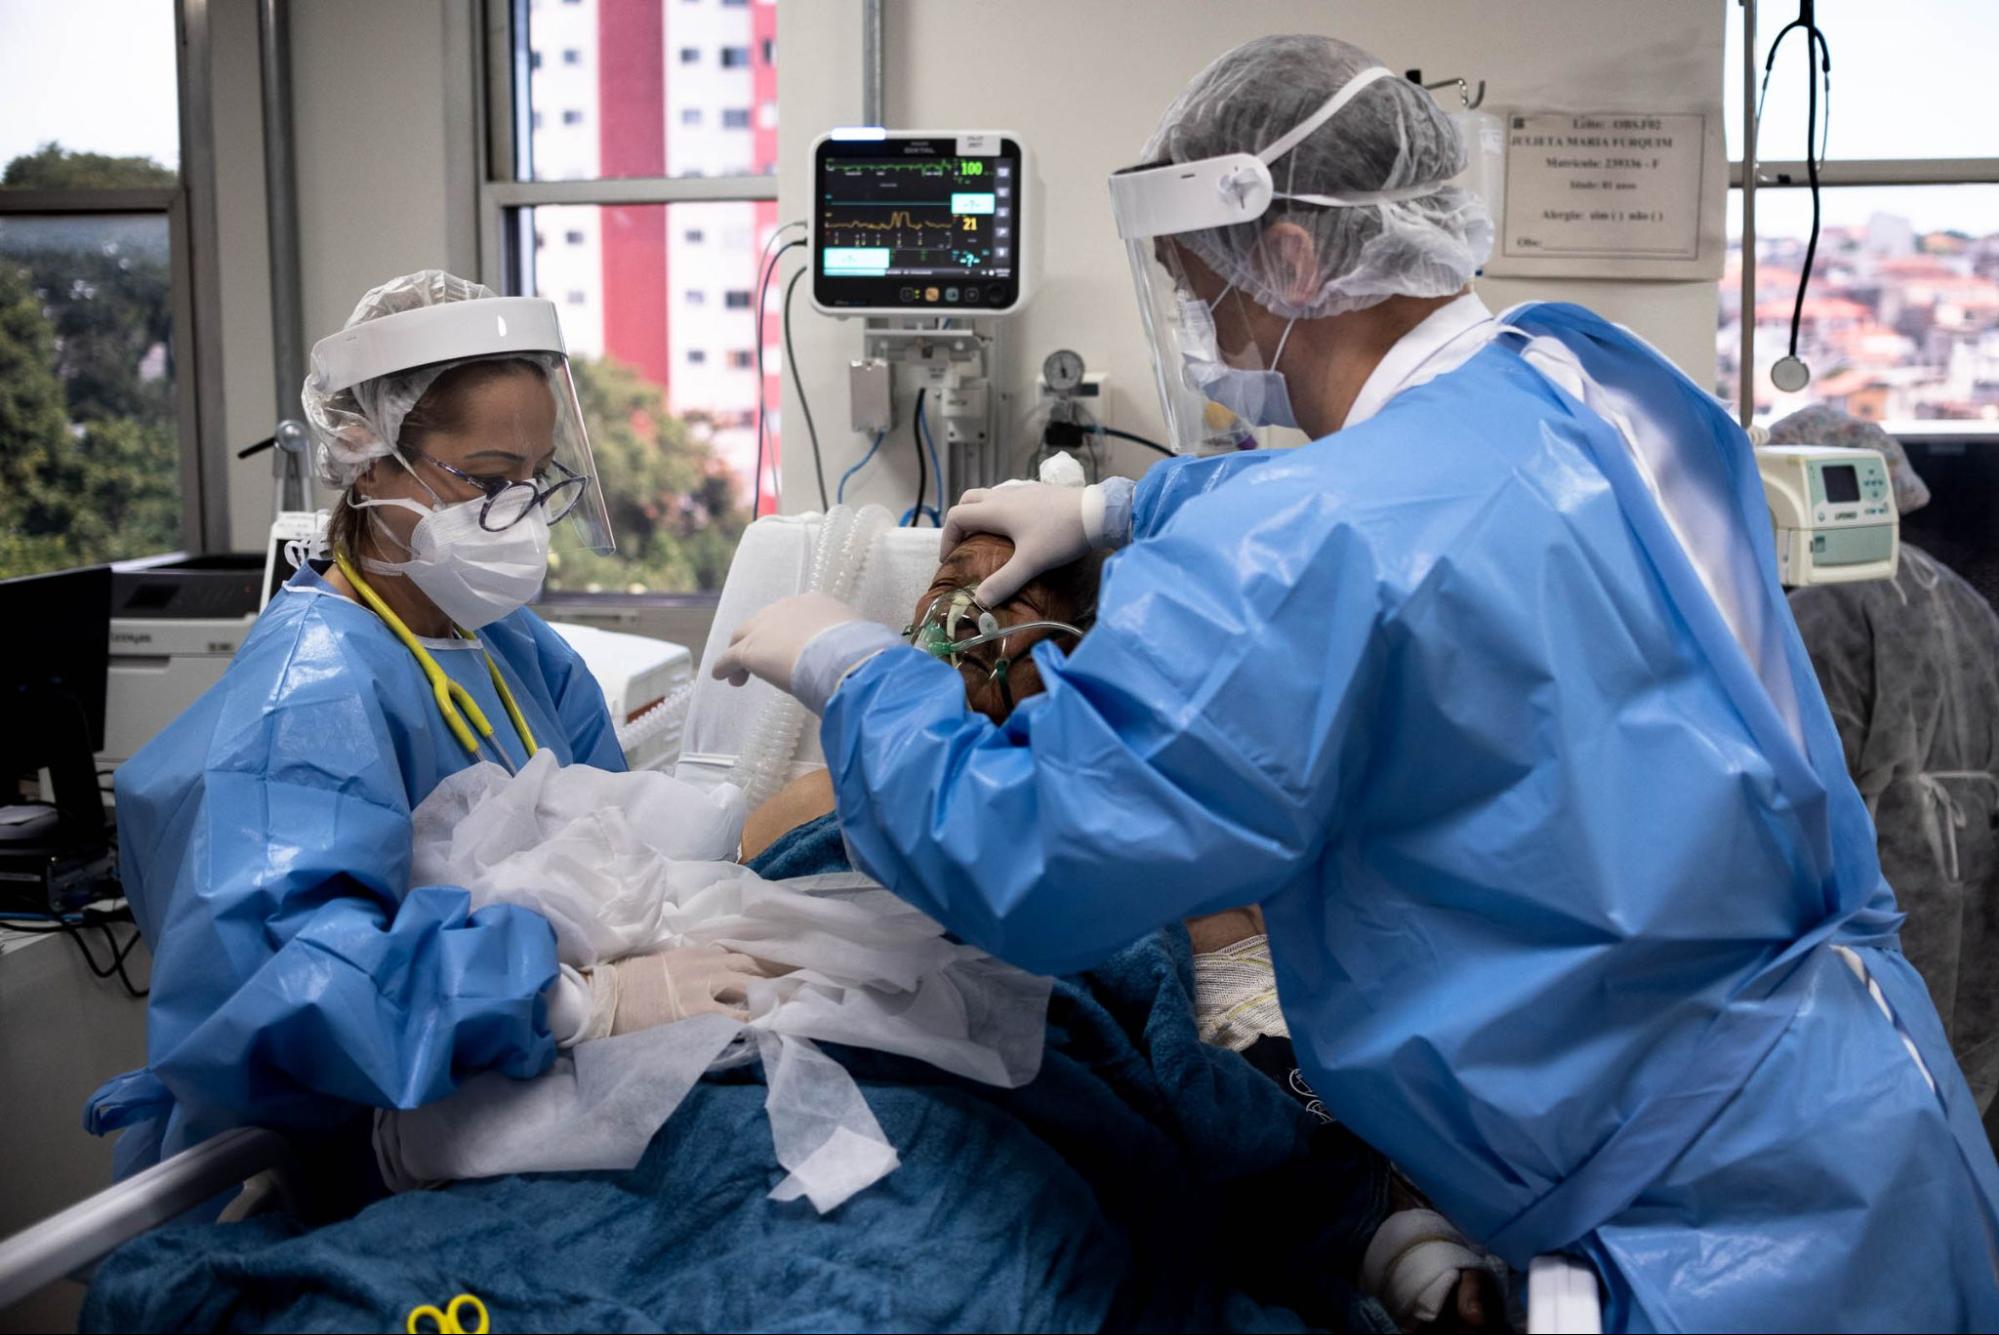 Hospital staff help a patient with oxygen